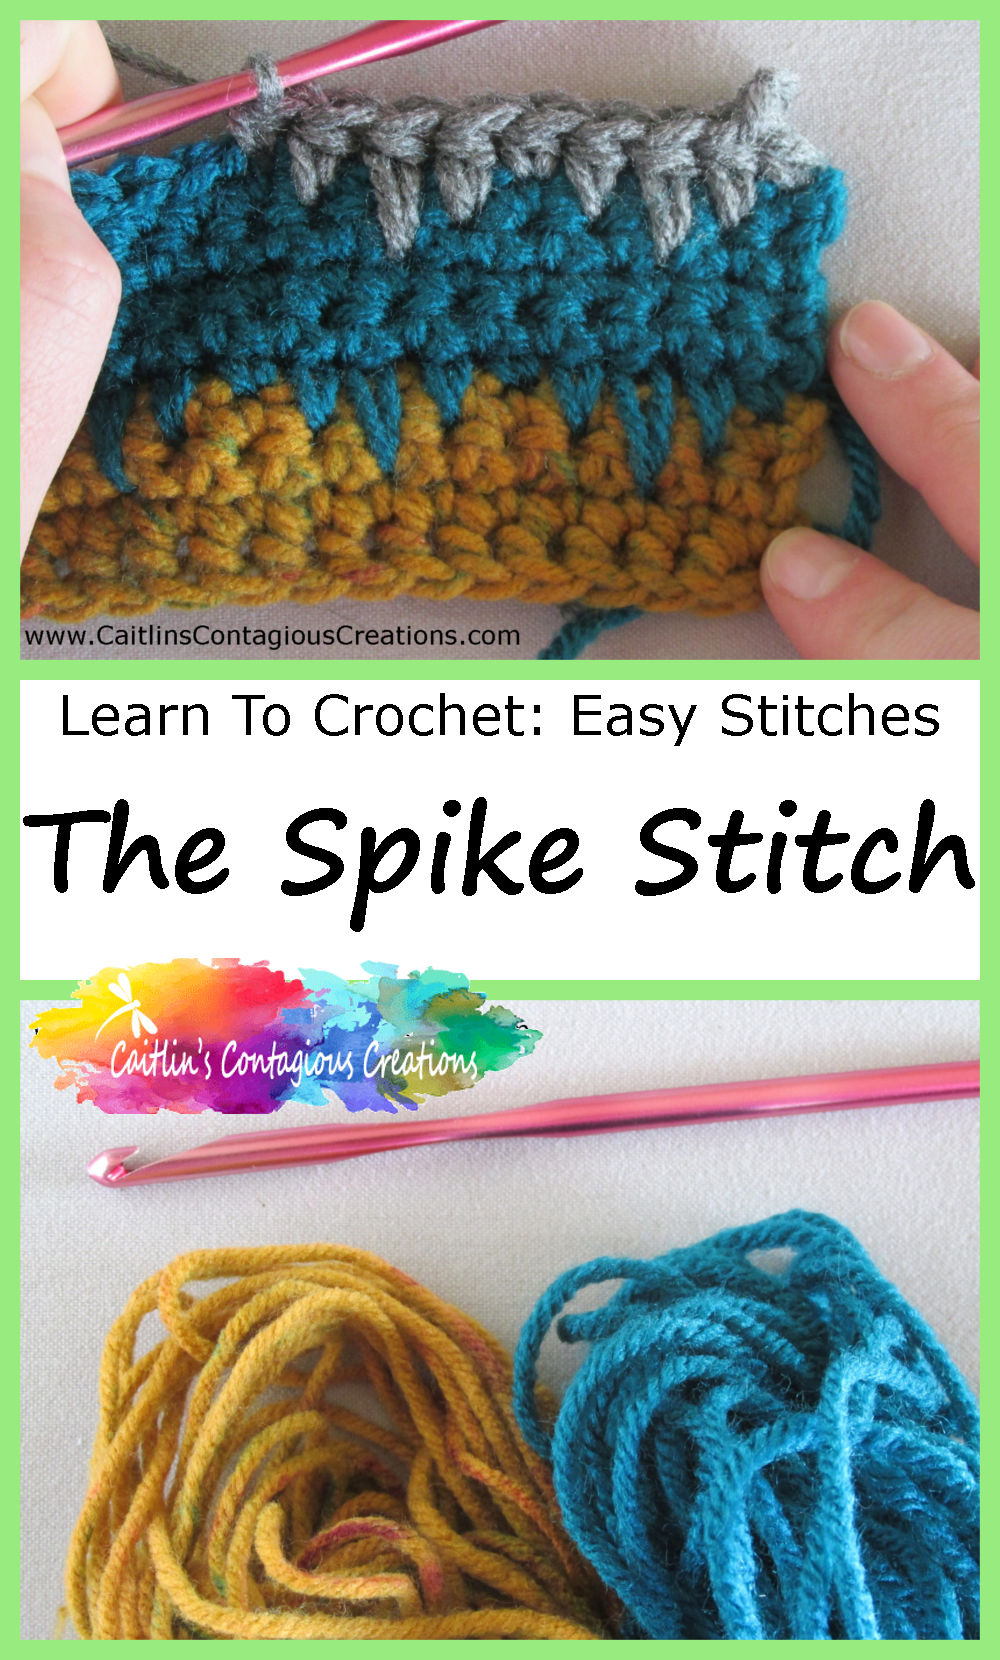 Spike Stitch Crochet Tutorial from Caitlin's Contagious Creations. This free crochet lesson for an easy crochet stitch helps beginners move beyond the basics. Learn how to crochet with a fun, quick picture guide including written directions for 3 variations of the spike stitch! #FreeCrochetLesson #HowToCrochet #LearnCrochetStitches